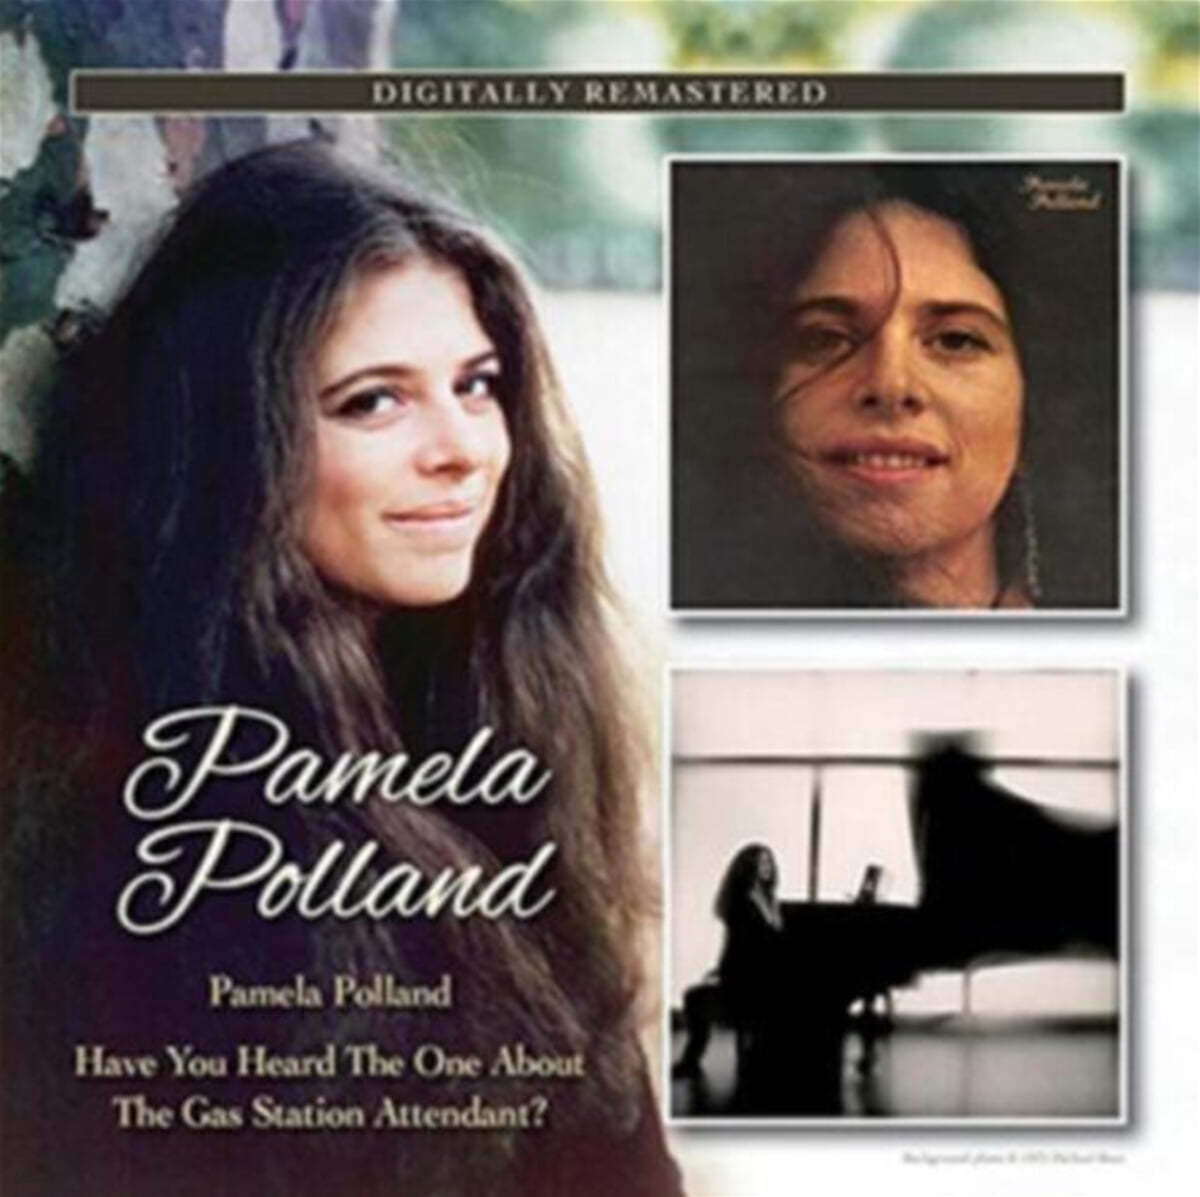 Pamela Polland (파멜라 폴란드) - Pamela Polland / Have You Heard The One About the Gas Station Attendant?